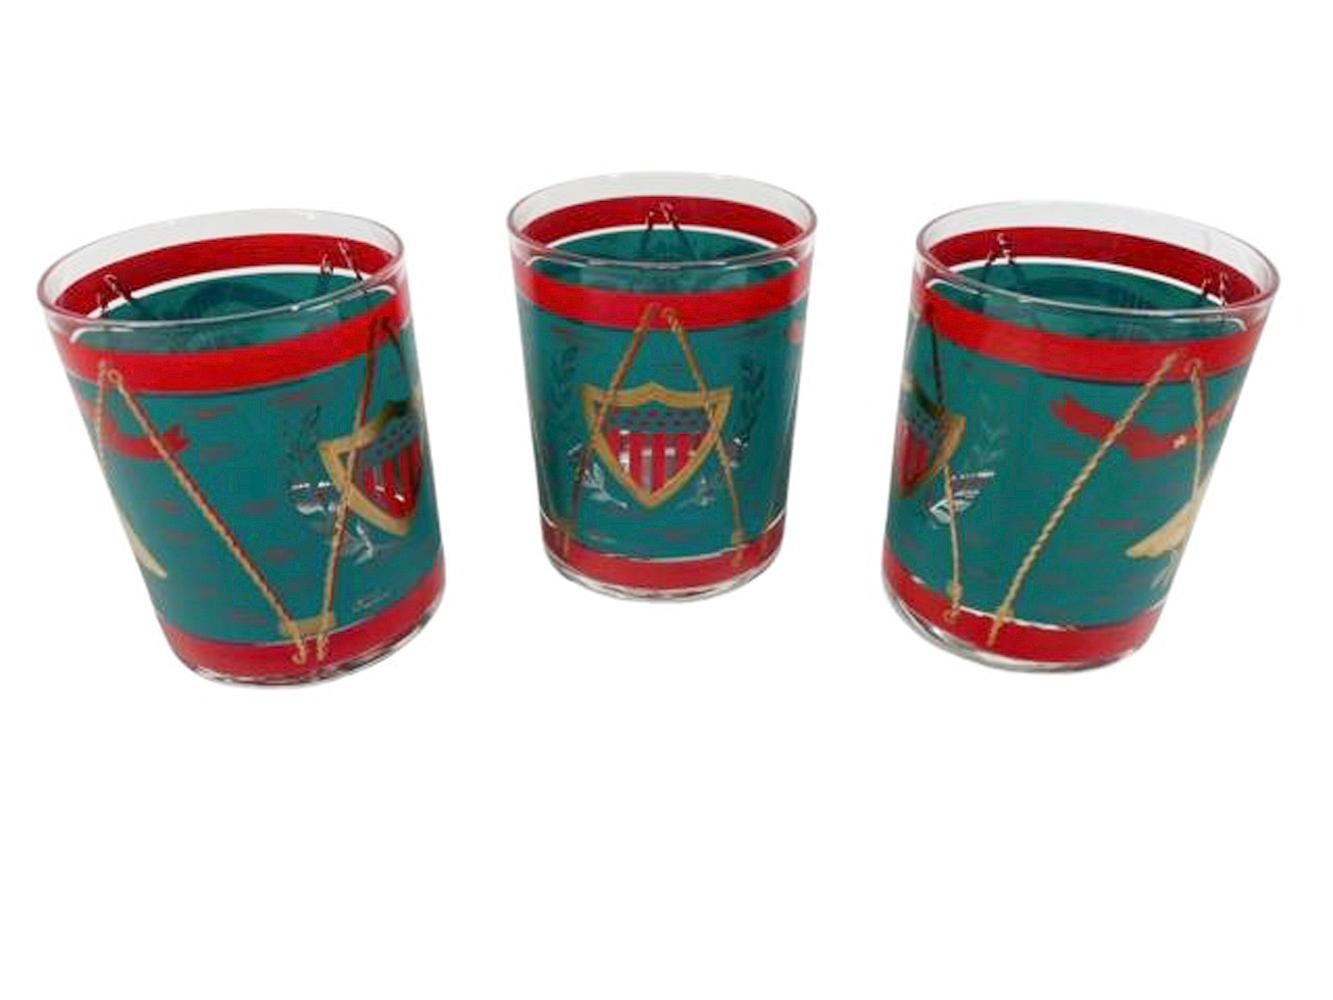 Four Vintage Cera Parade Drum Rocks Glasses with Eagle and Shield Design In Good Condition For Sale In Nantucket, MA